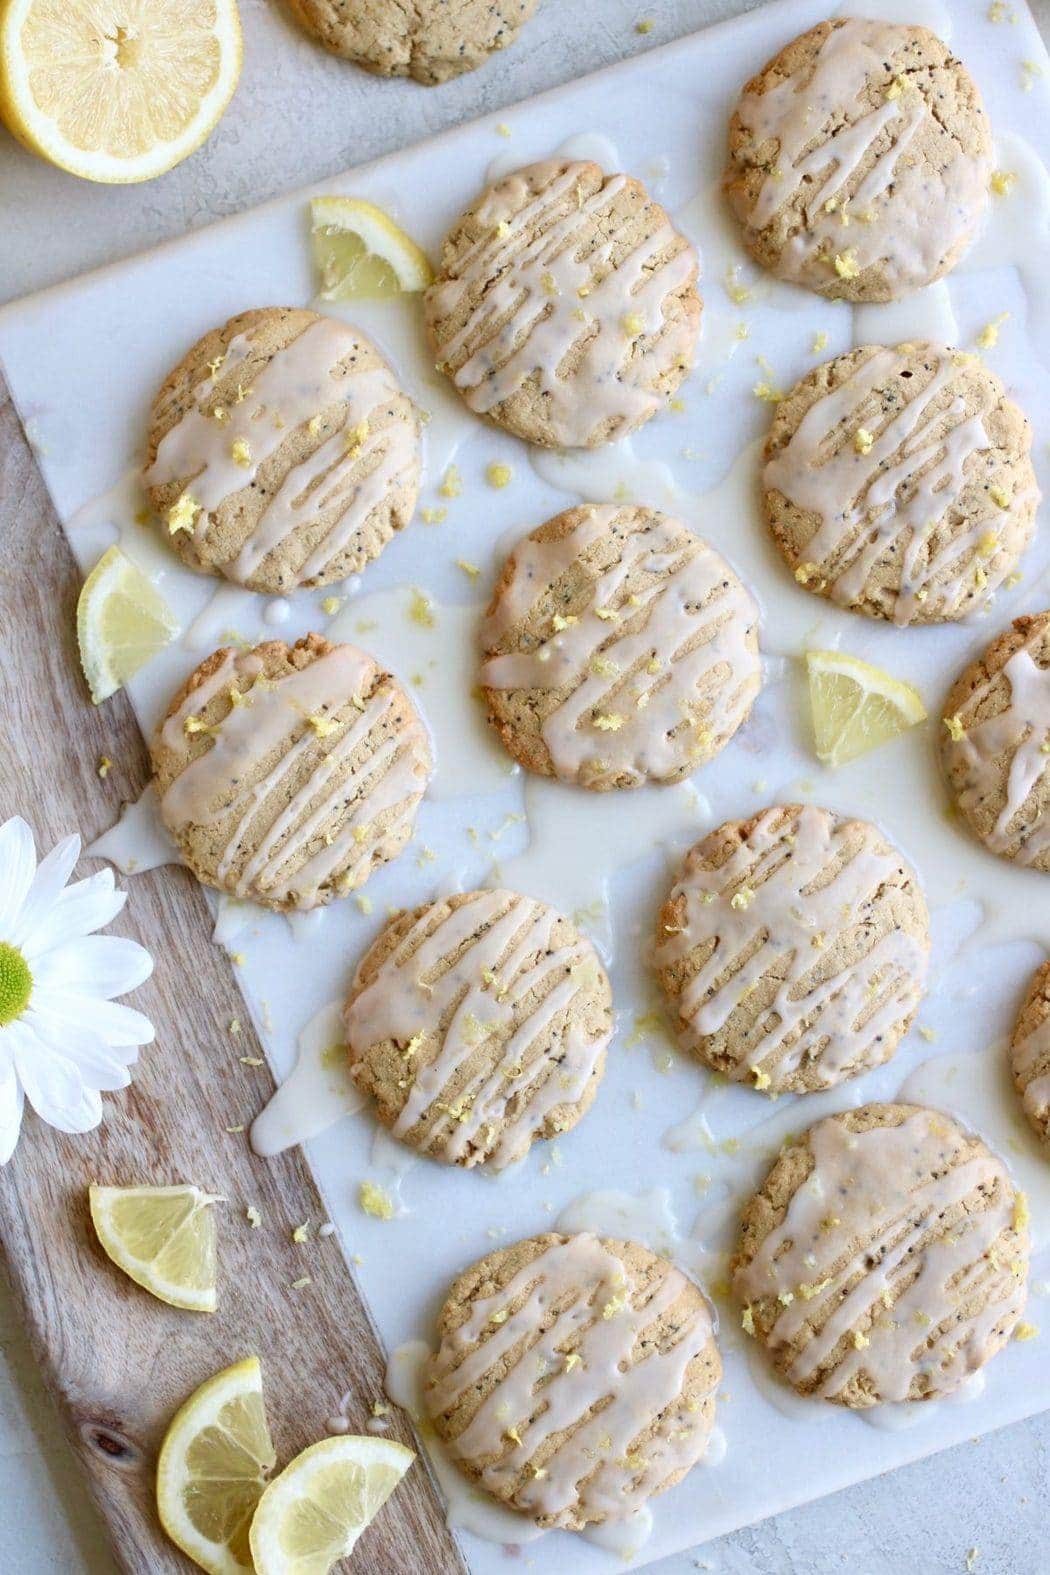 Overhead shot of the Paleo Lemon Poppy Seed Cookies single layered on a white marble cheese board and drizzled with a glaze and sprinkled with lemon zest.